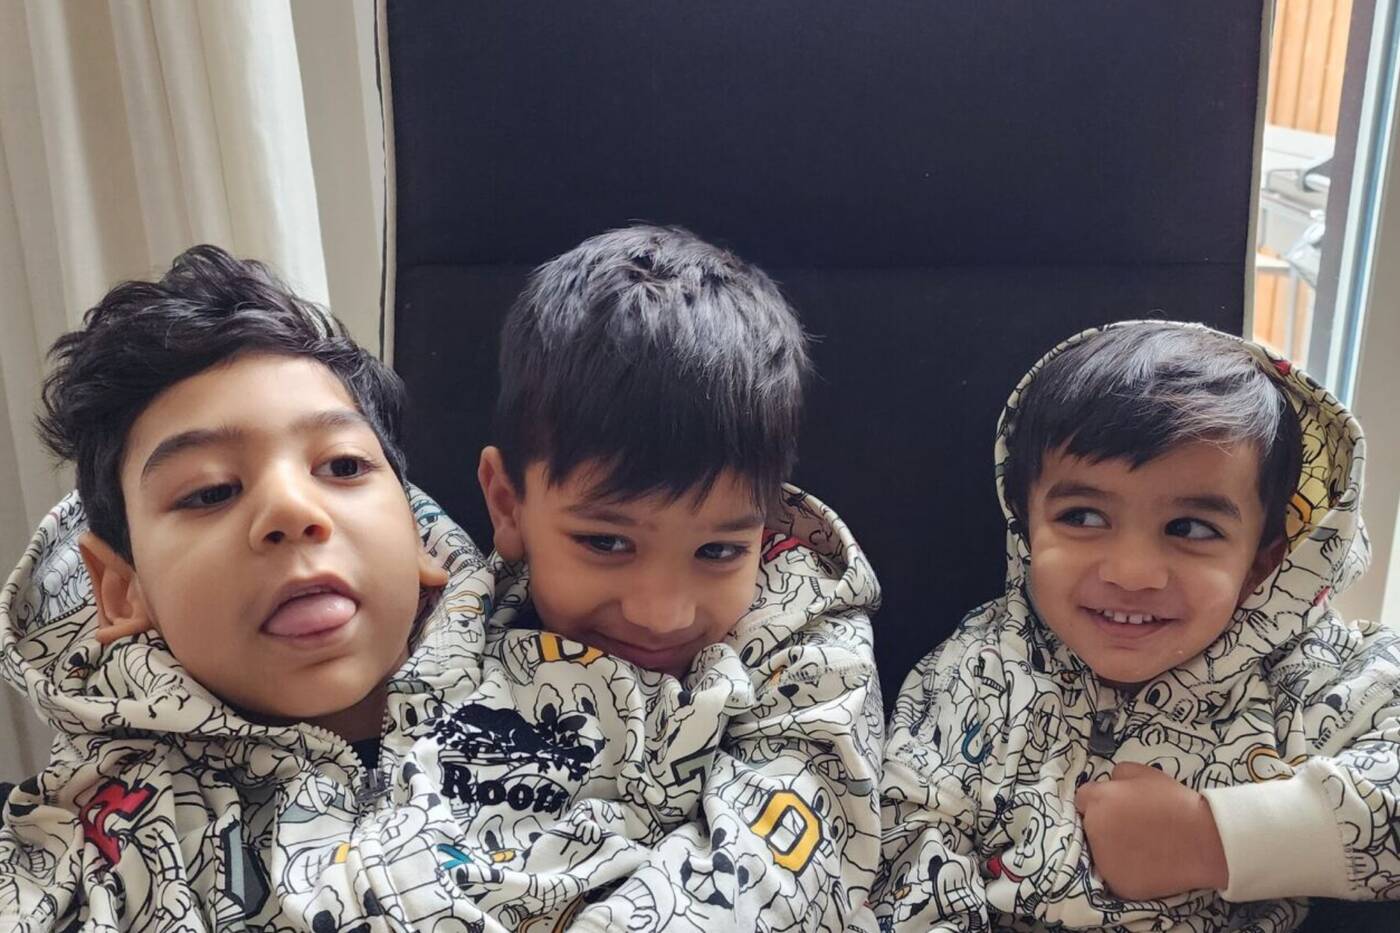 Shaan and his brothers